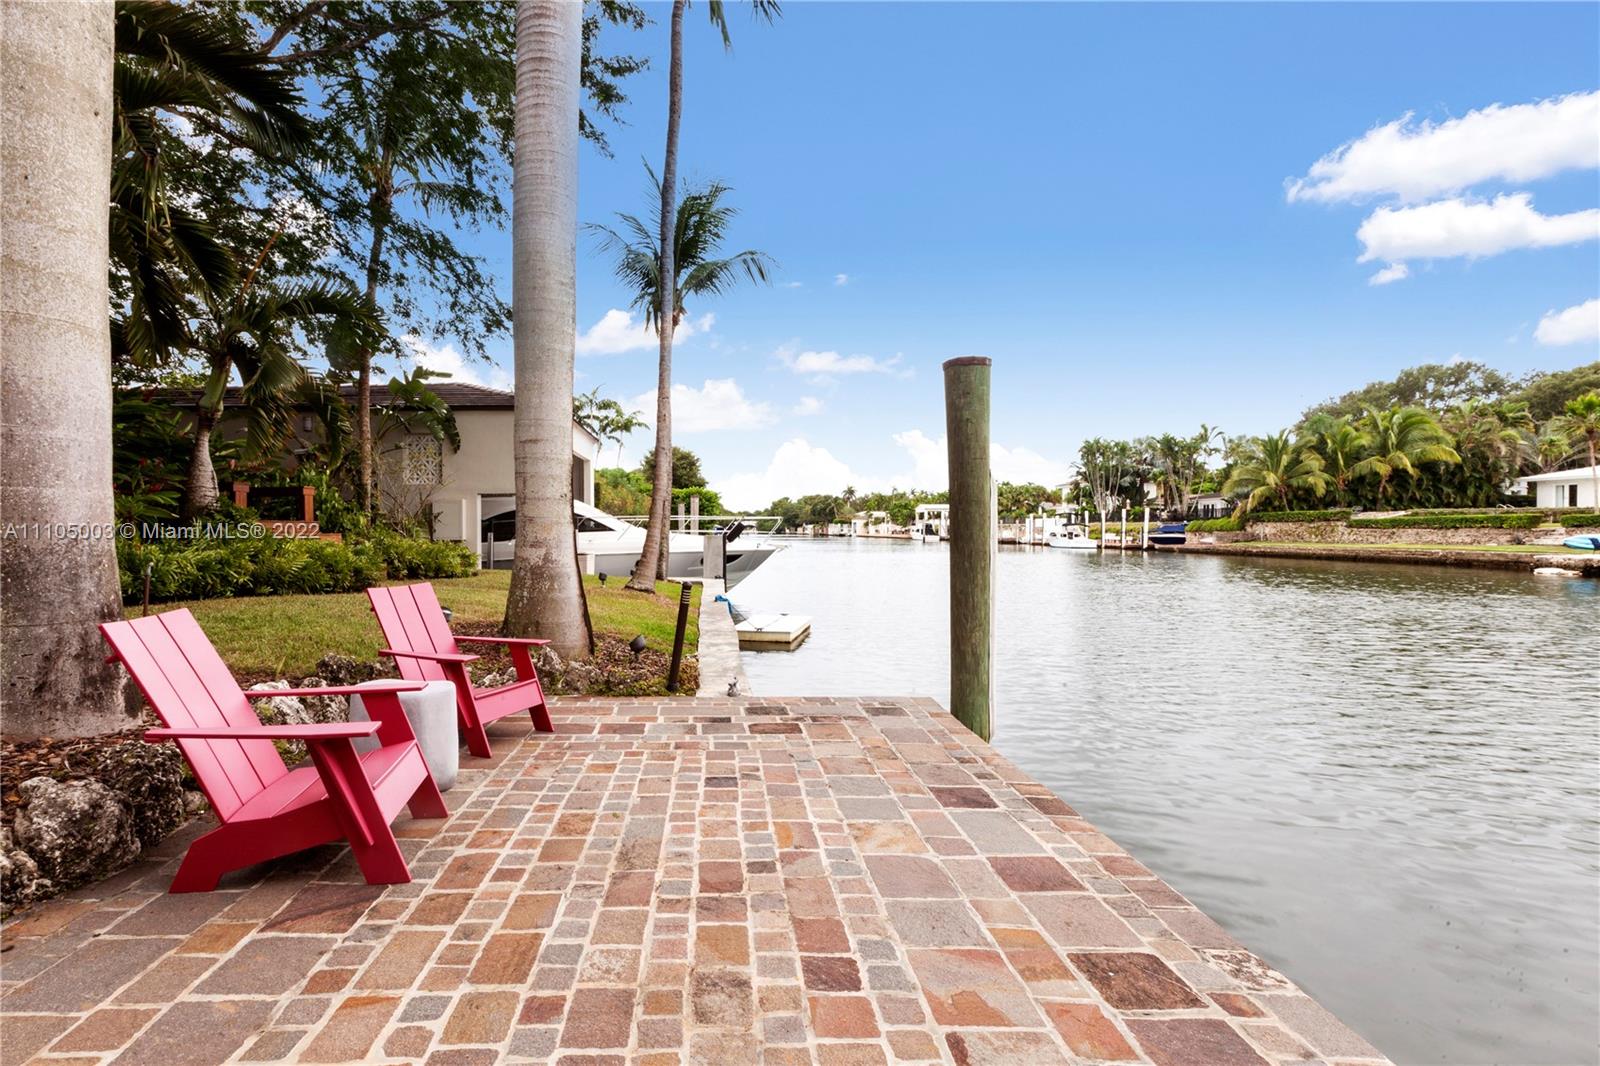 Extraordinary 137 ft. Waterfront family home in Coral Gables, perfect for boaters and water sport lovers, featuring a large Deck; Boat Slip and a unique Boathouse (aprox 500 sqft bonus area under AC media/gym room). This very spacious completely remodeled 5 BR 6.5BA and an office w/ private entrance is located on the widest part of the protected waterways east of US-1 on a gated 20,598 lot.  Meticulously designed to enjoy the incredible finishes throughout a very elegant floor plan. The abundance of light integrate both of the outside and inside living spaces. Close to shops, restaurants & top schools. Rare opportunity to own your private Resort and wake up every morning with gorgeous views of the water and lush gardens, and a chance to paddle boarding or jet skiing on your own backyard.